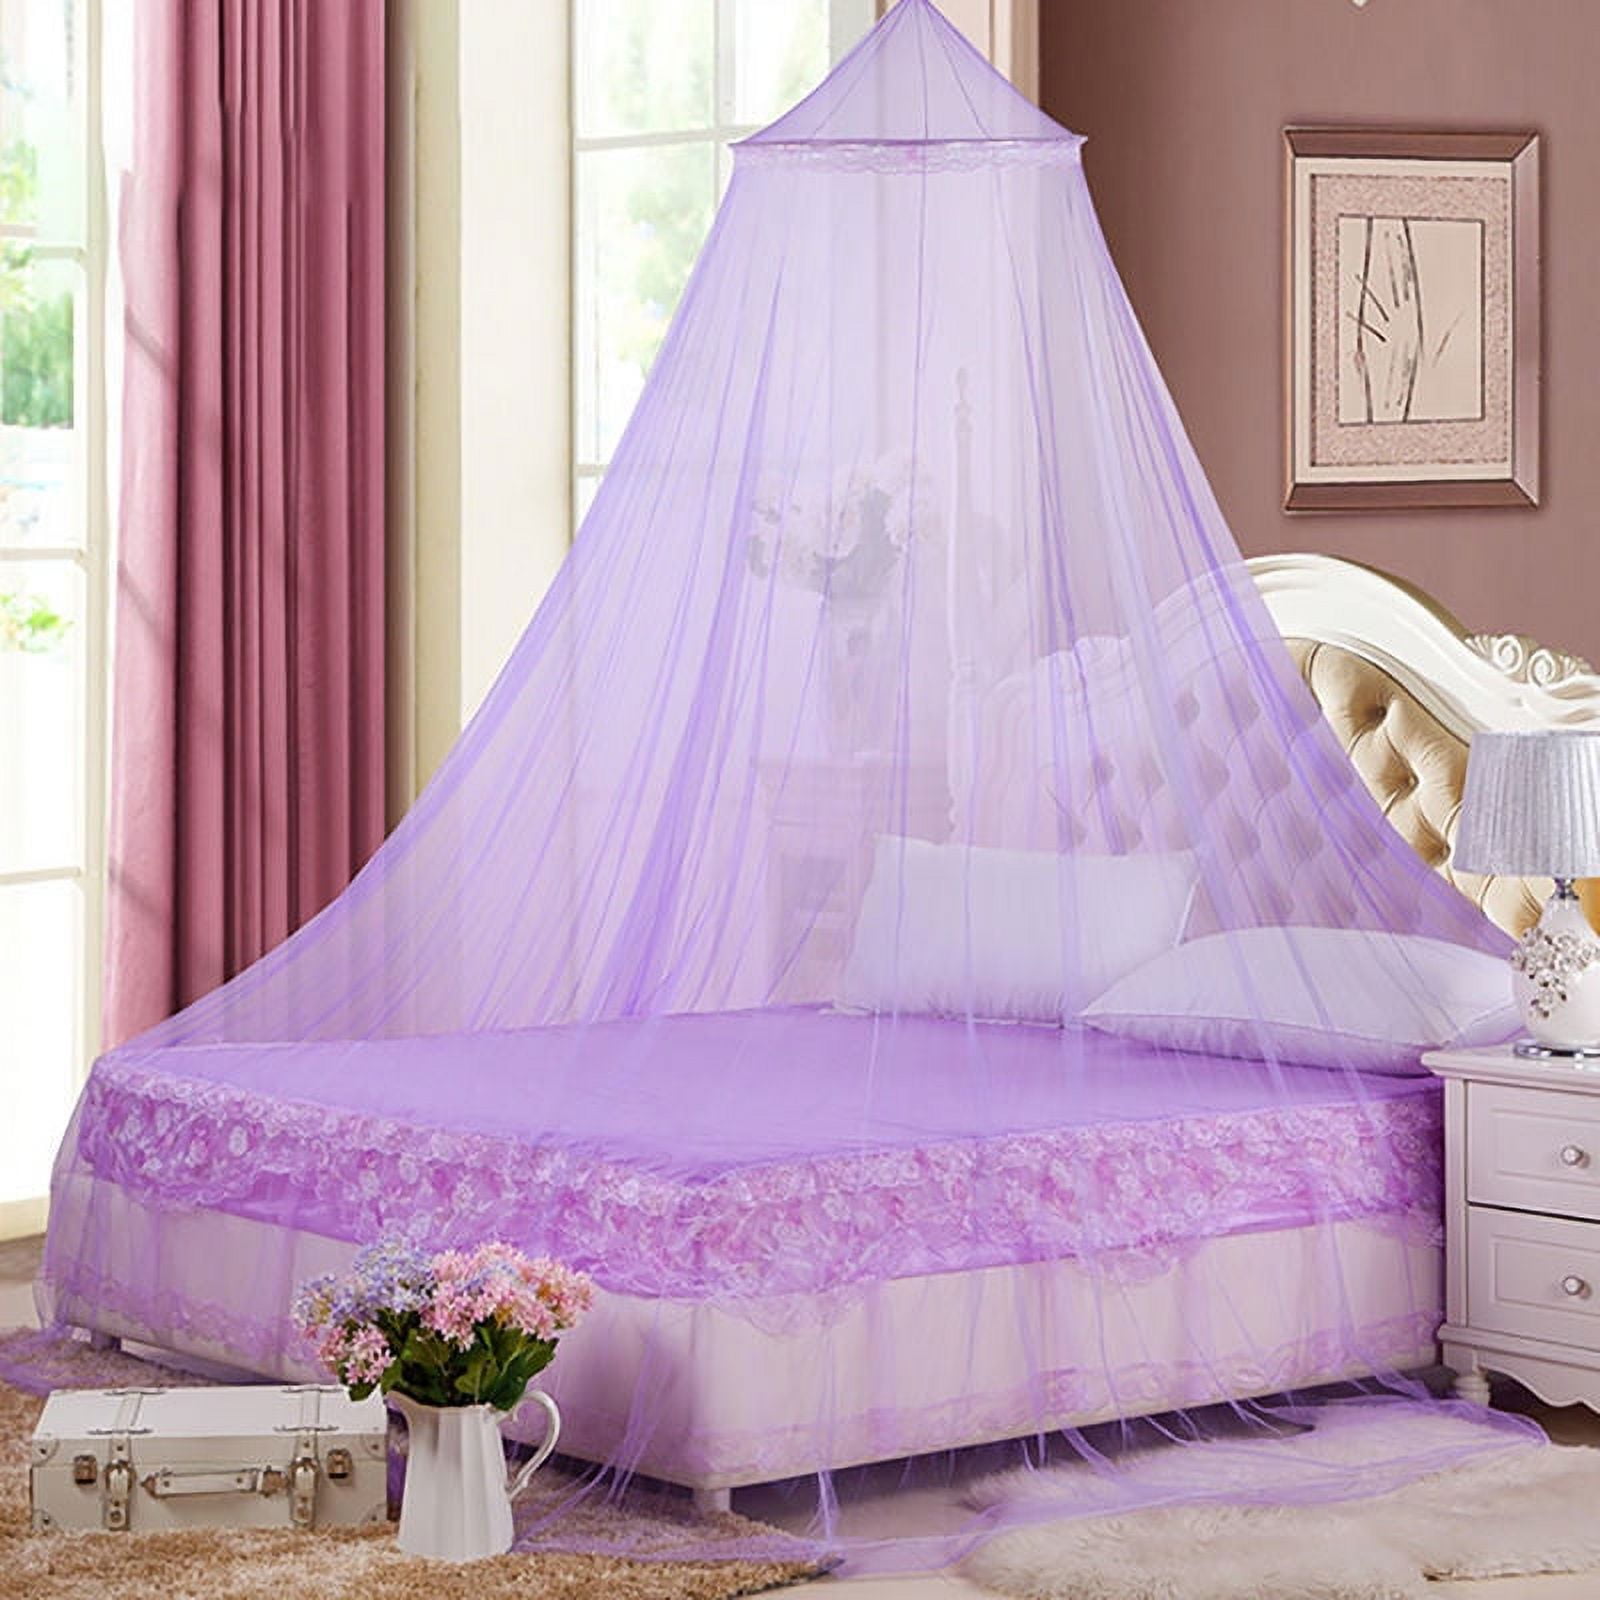 U-pick Bed Canopy with Jumbo Swag Hook for Girls, Princess Bed Canopy Glow  Christmas Snowflakes Bed Canopy for Girls Room Decor, Encrypted Fabric,  Purple 